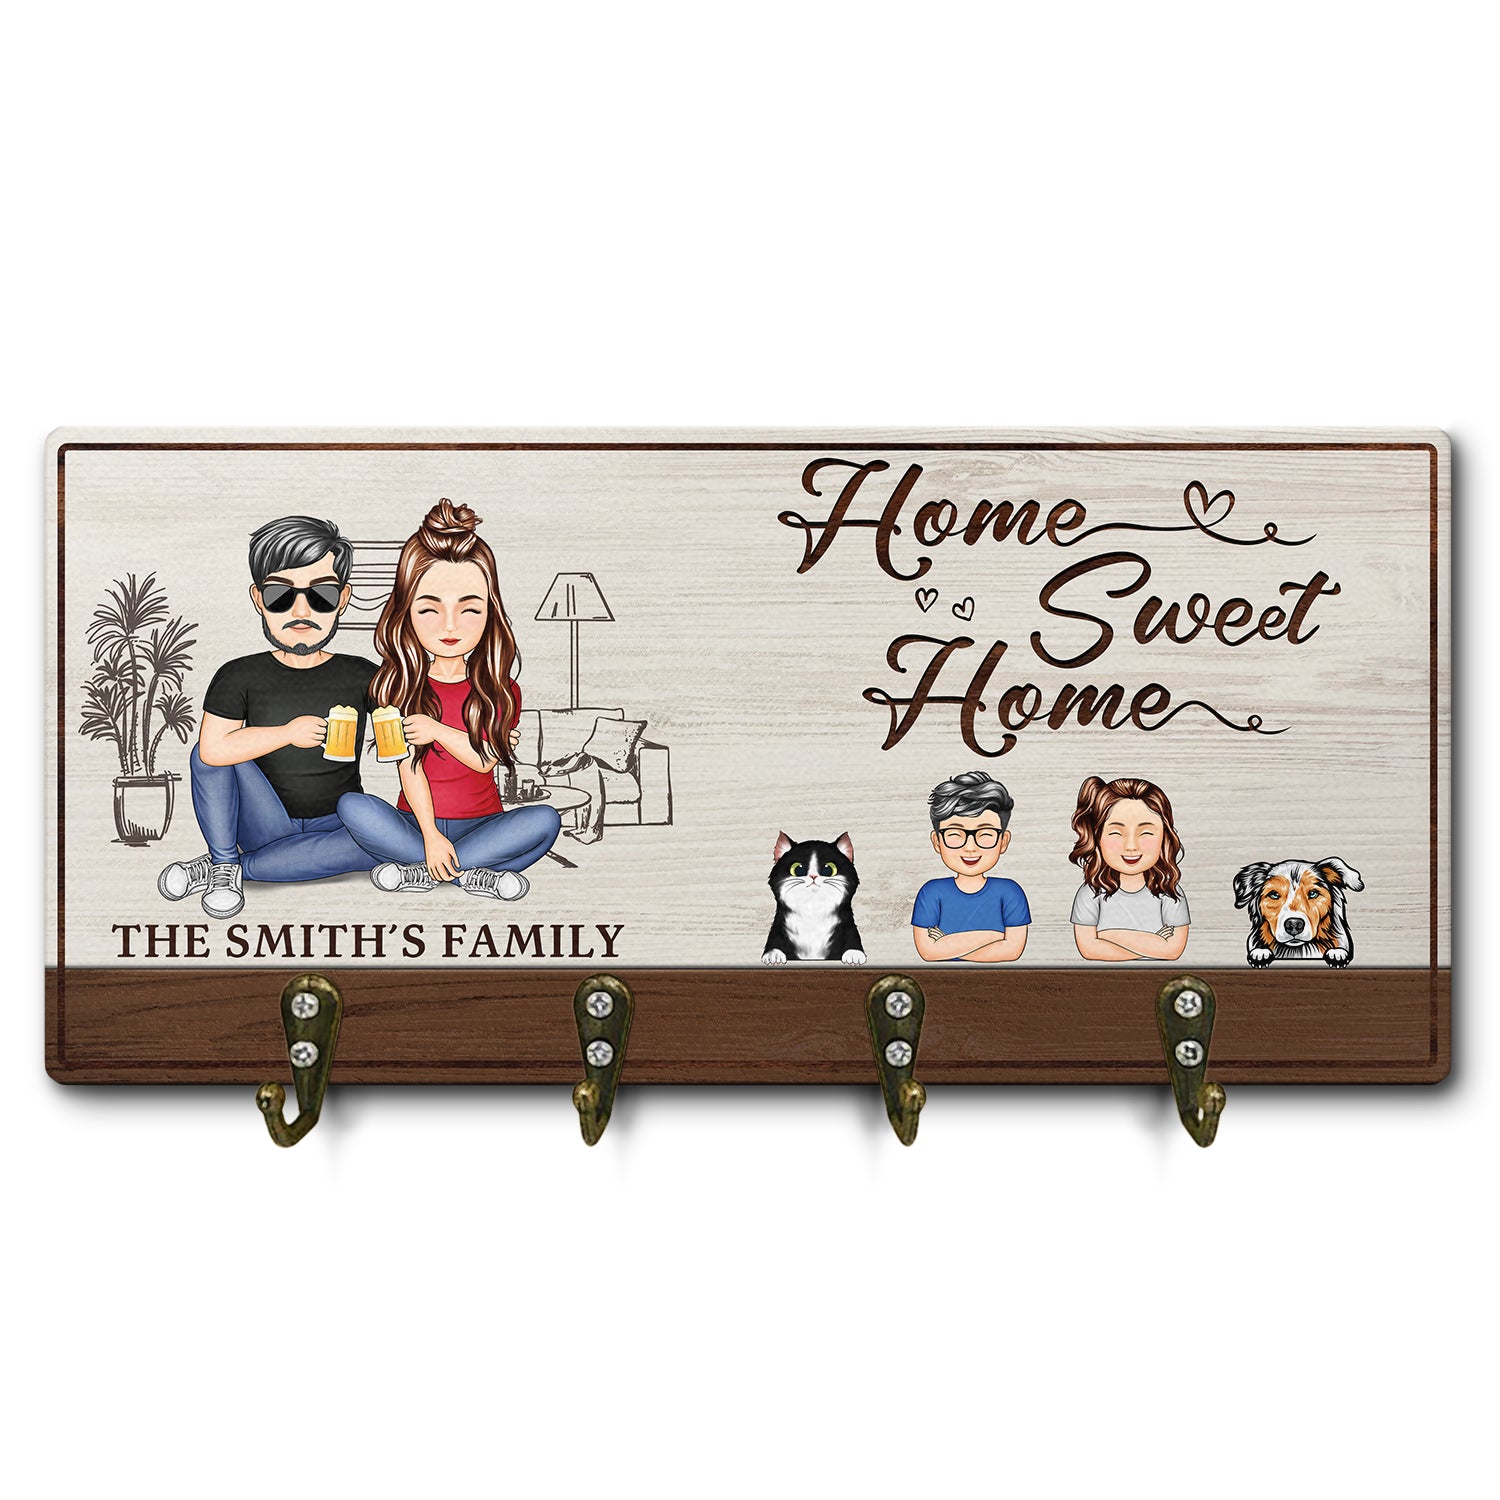 Home Sweet Home - Home Decor Gift For Family, Husband, Wife, Couple - Personalized Wood Key Holder